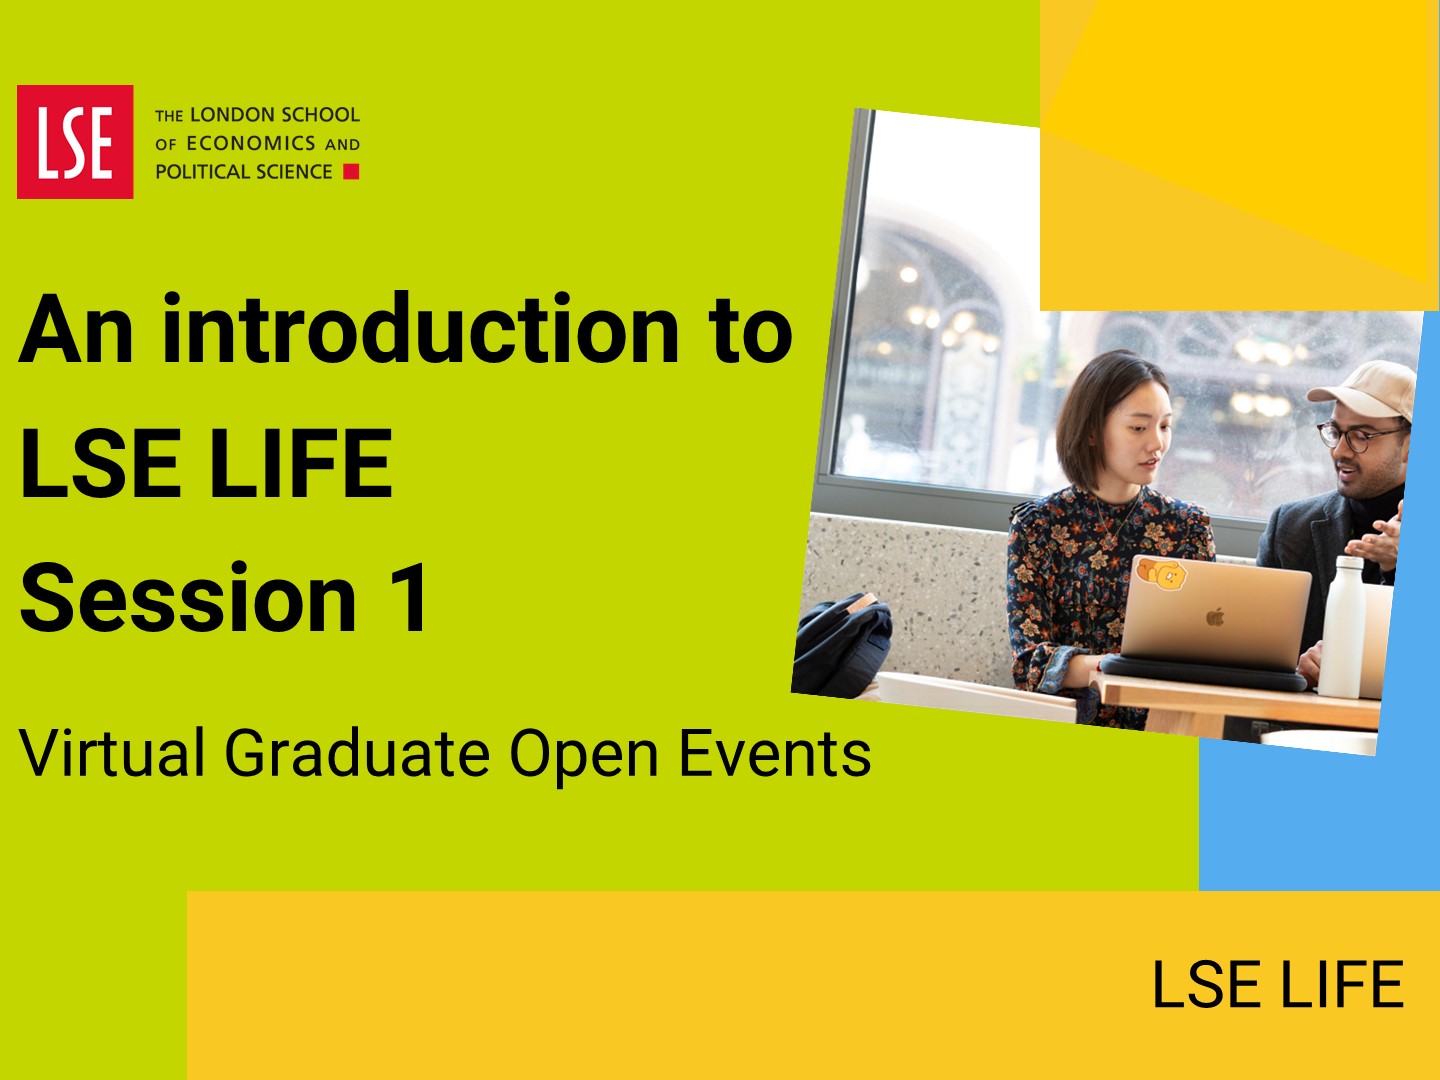 An introduction to LSE LIFE Session 1